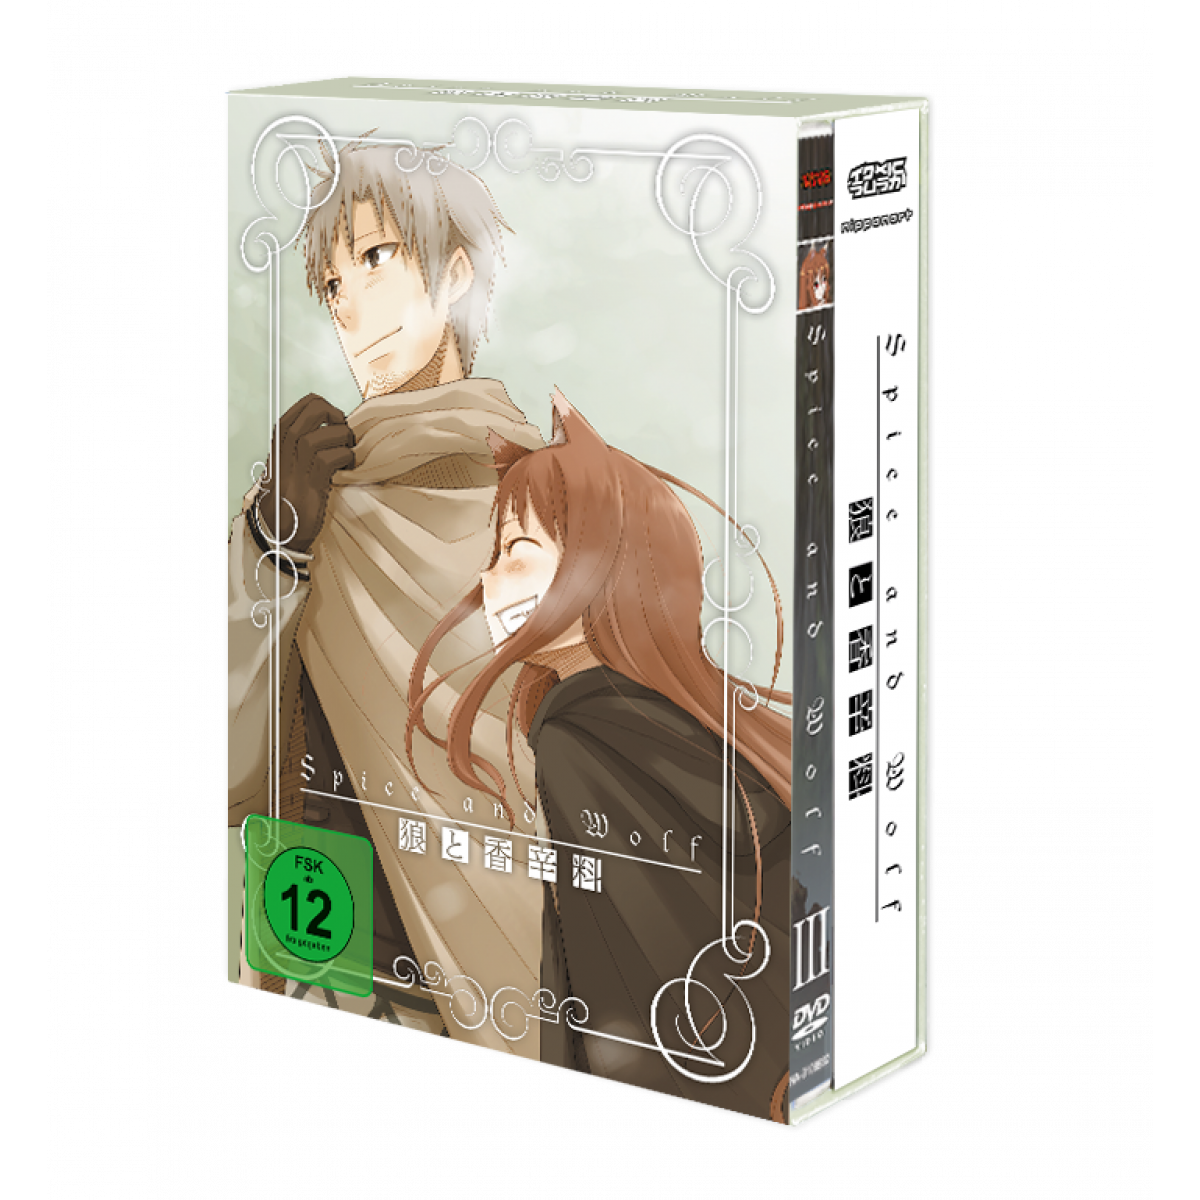 Spice and wolf staffel 3